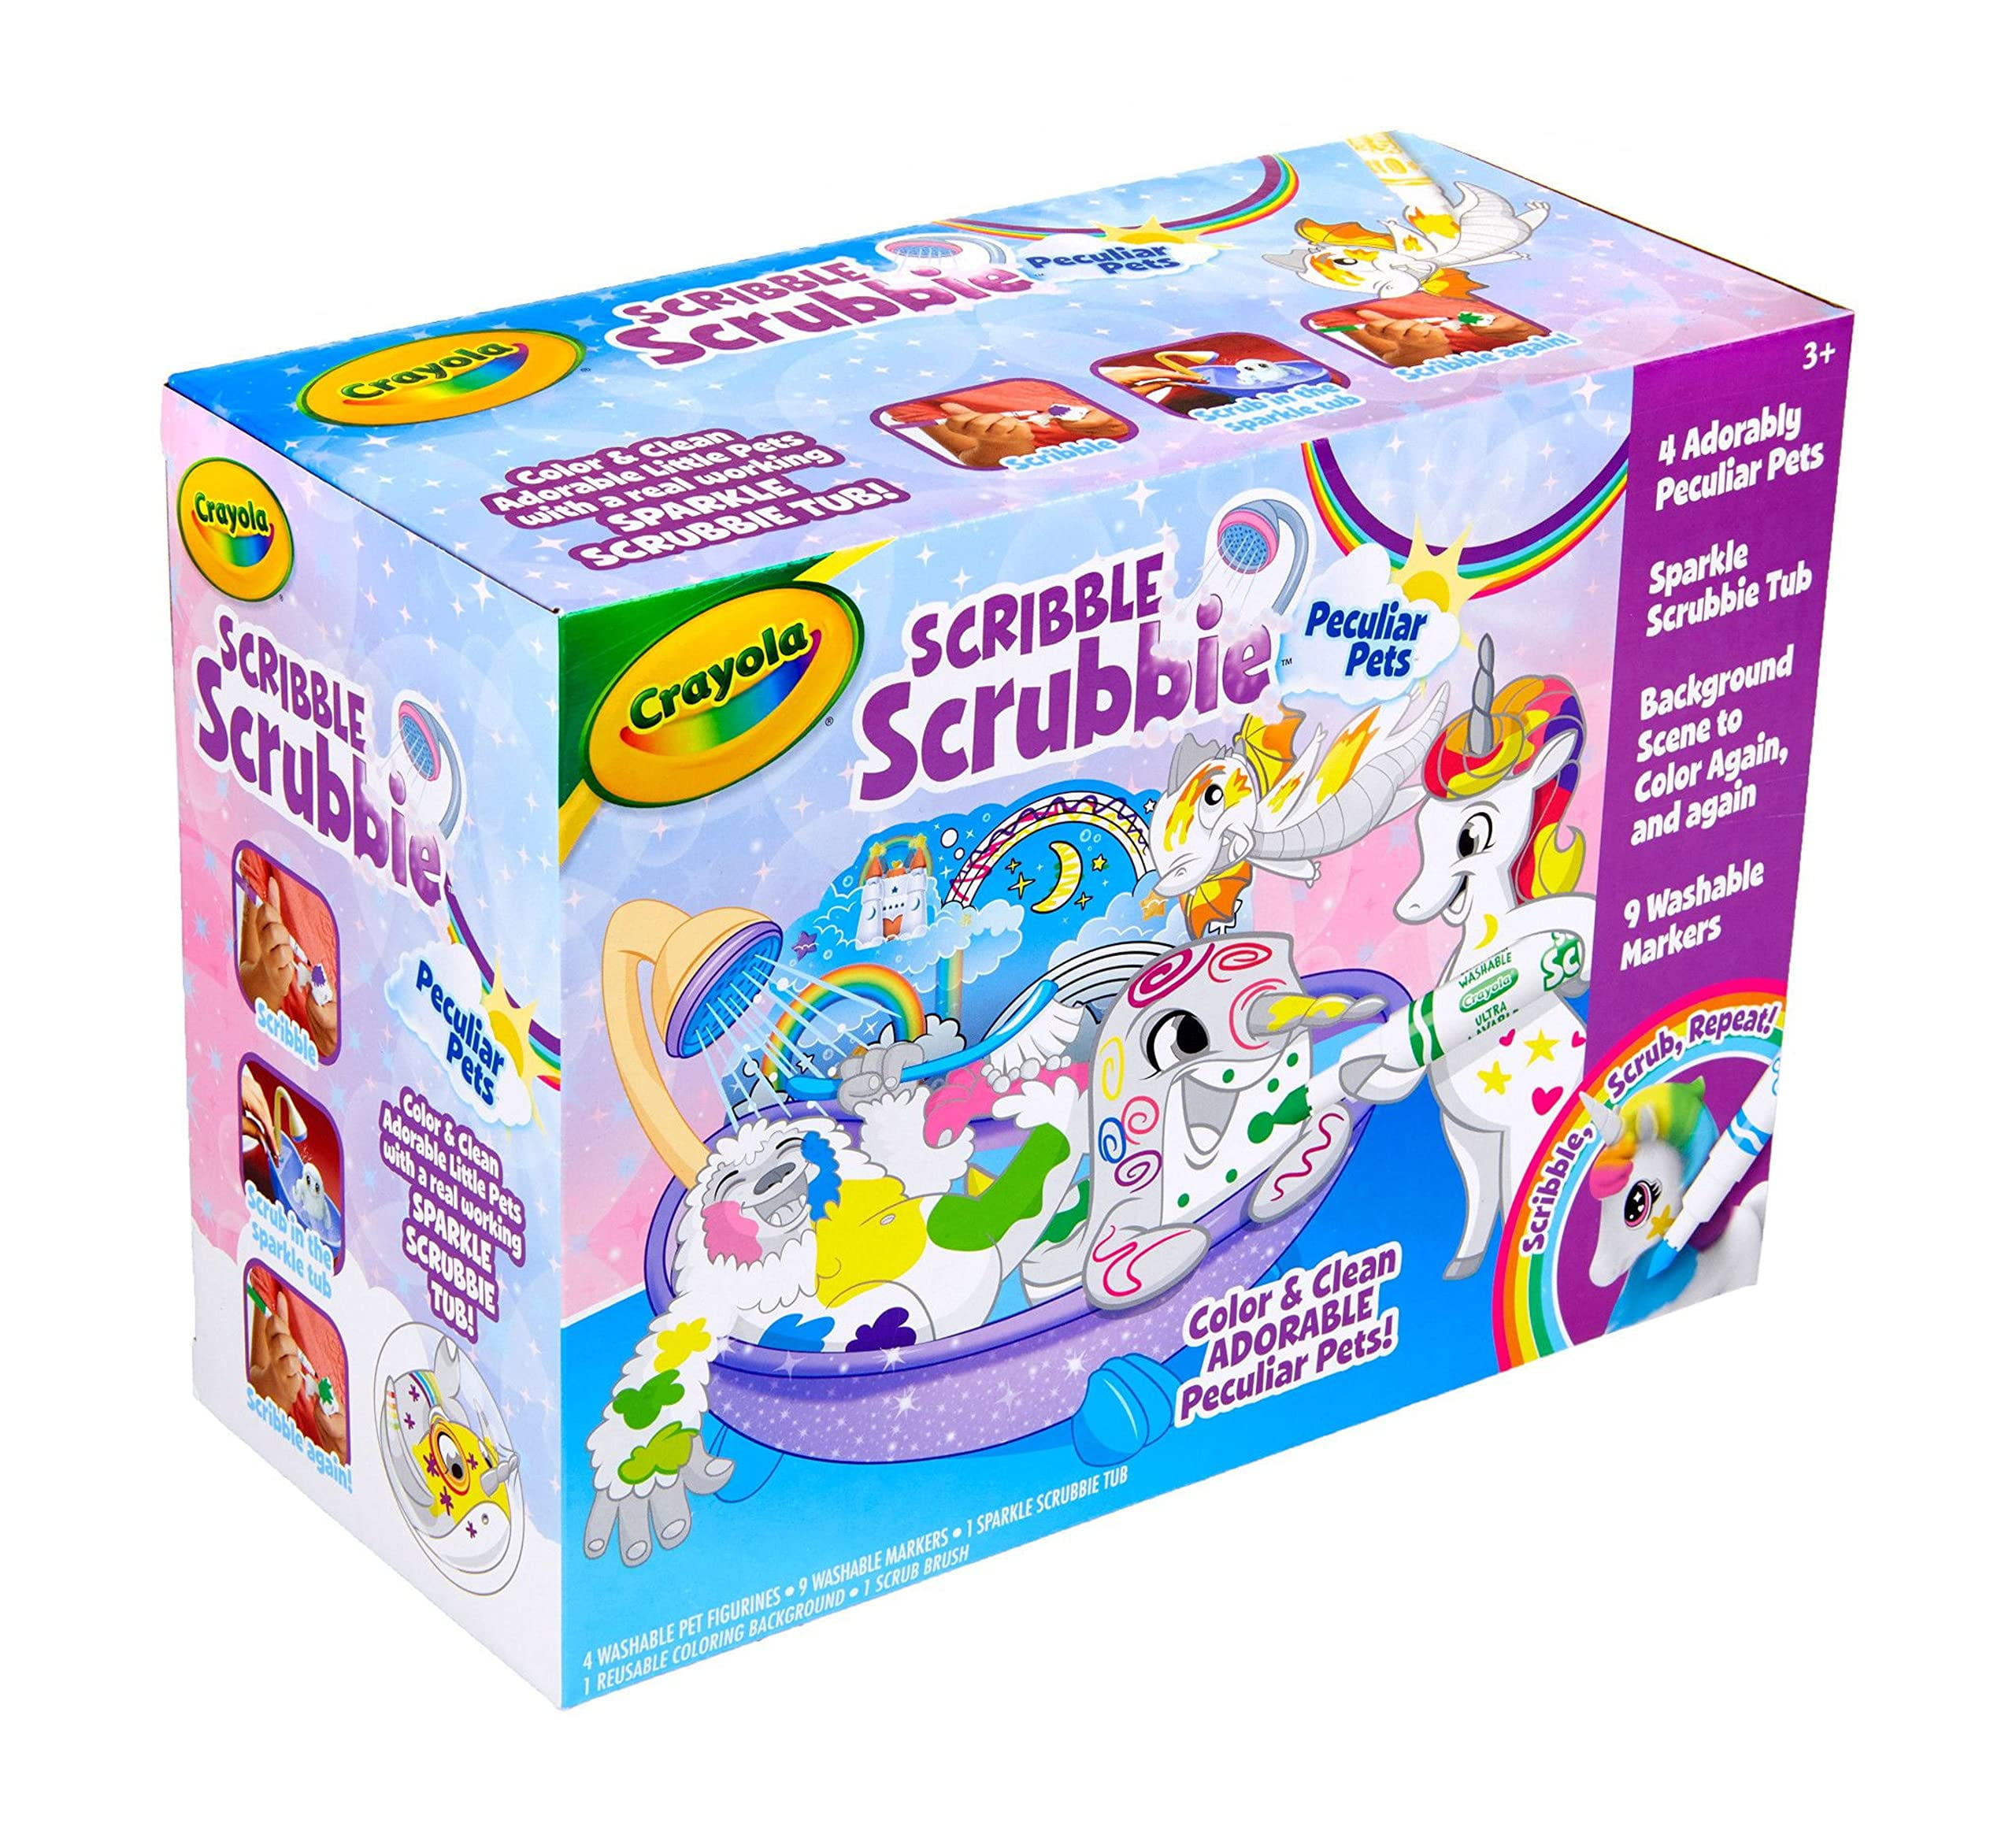 Crayola Scribble Scrubbie Pets Tub Set, Washable Pet Care Toy, Animal Toys  for Girls & Boys, Gifts for Kids, Ages 3, 4, 5, 6